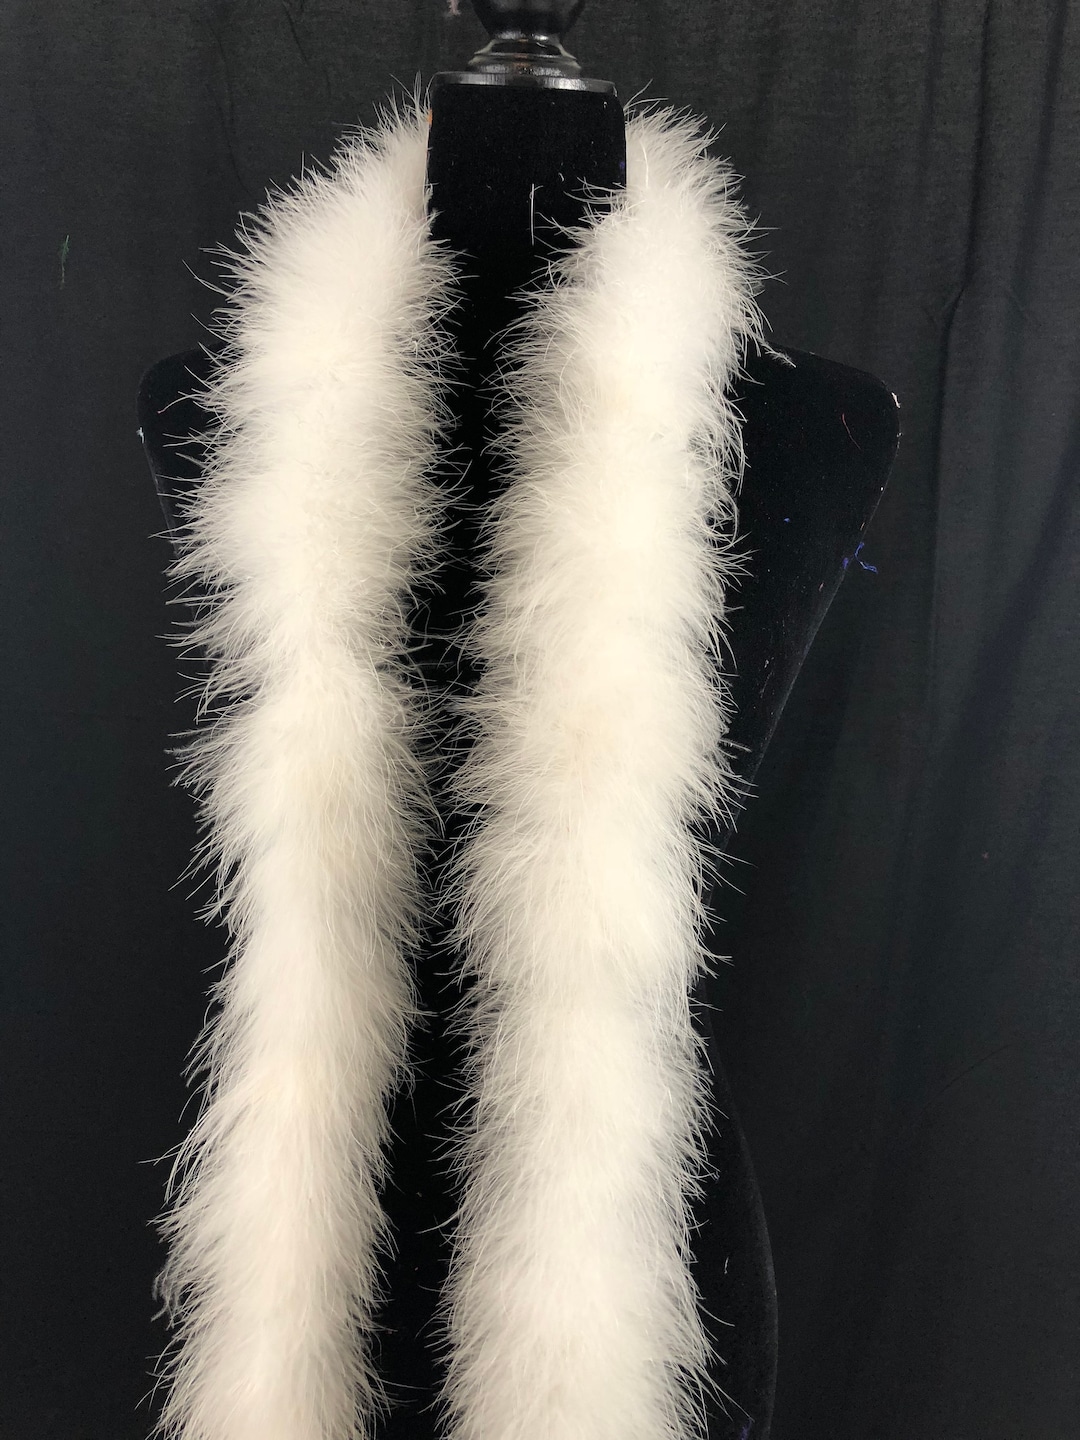  feather boa Marabou 2 Yards Long (72) 22 Grams (BLACK w/SILVER  LUREX) : Arts, Crafts & Sewing